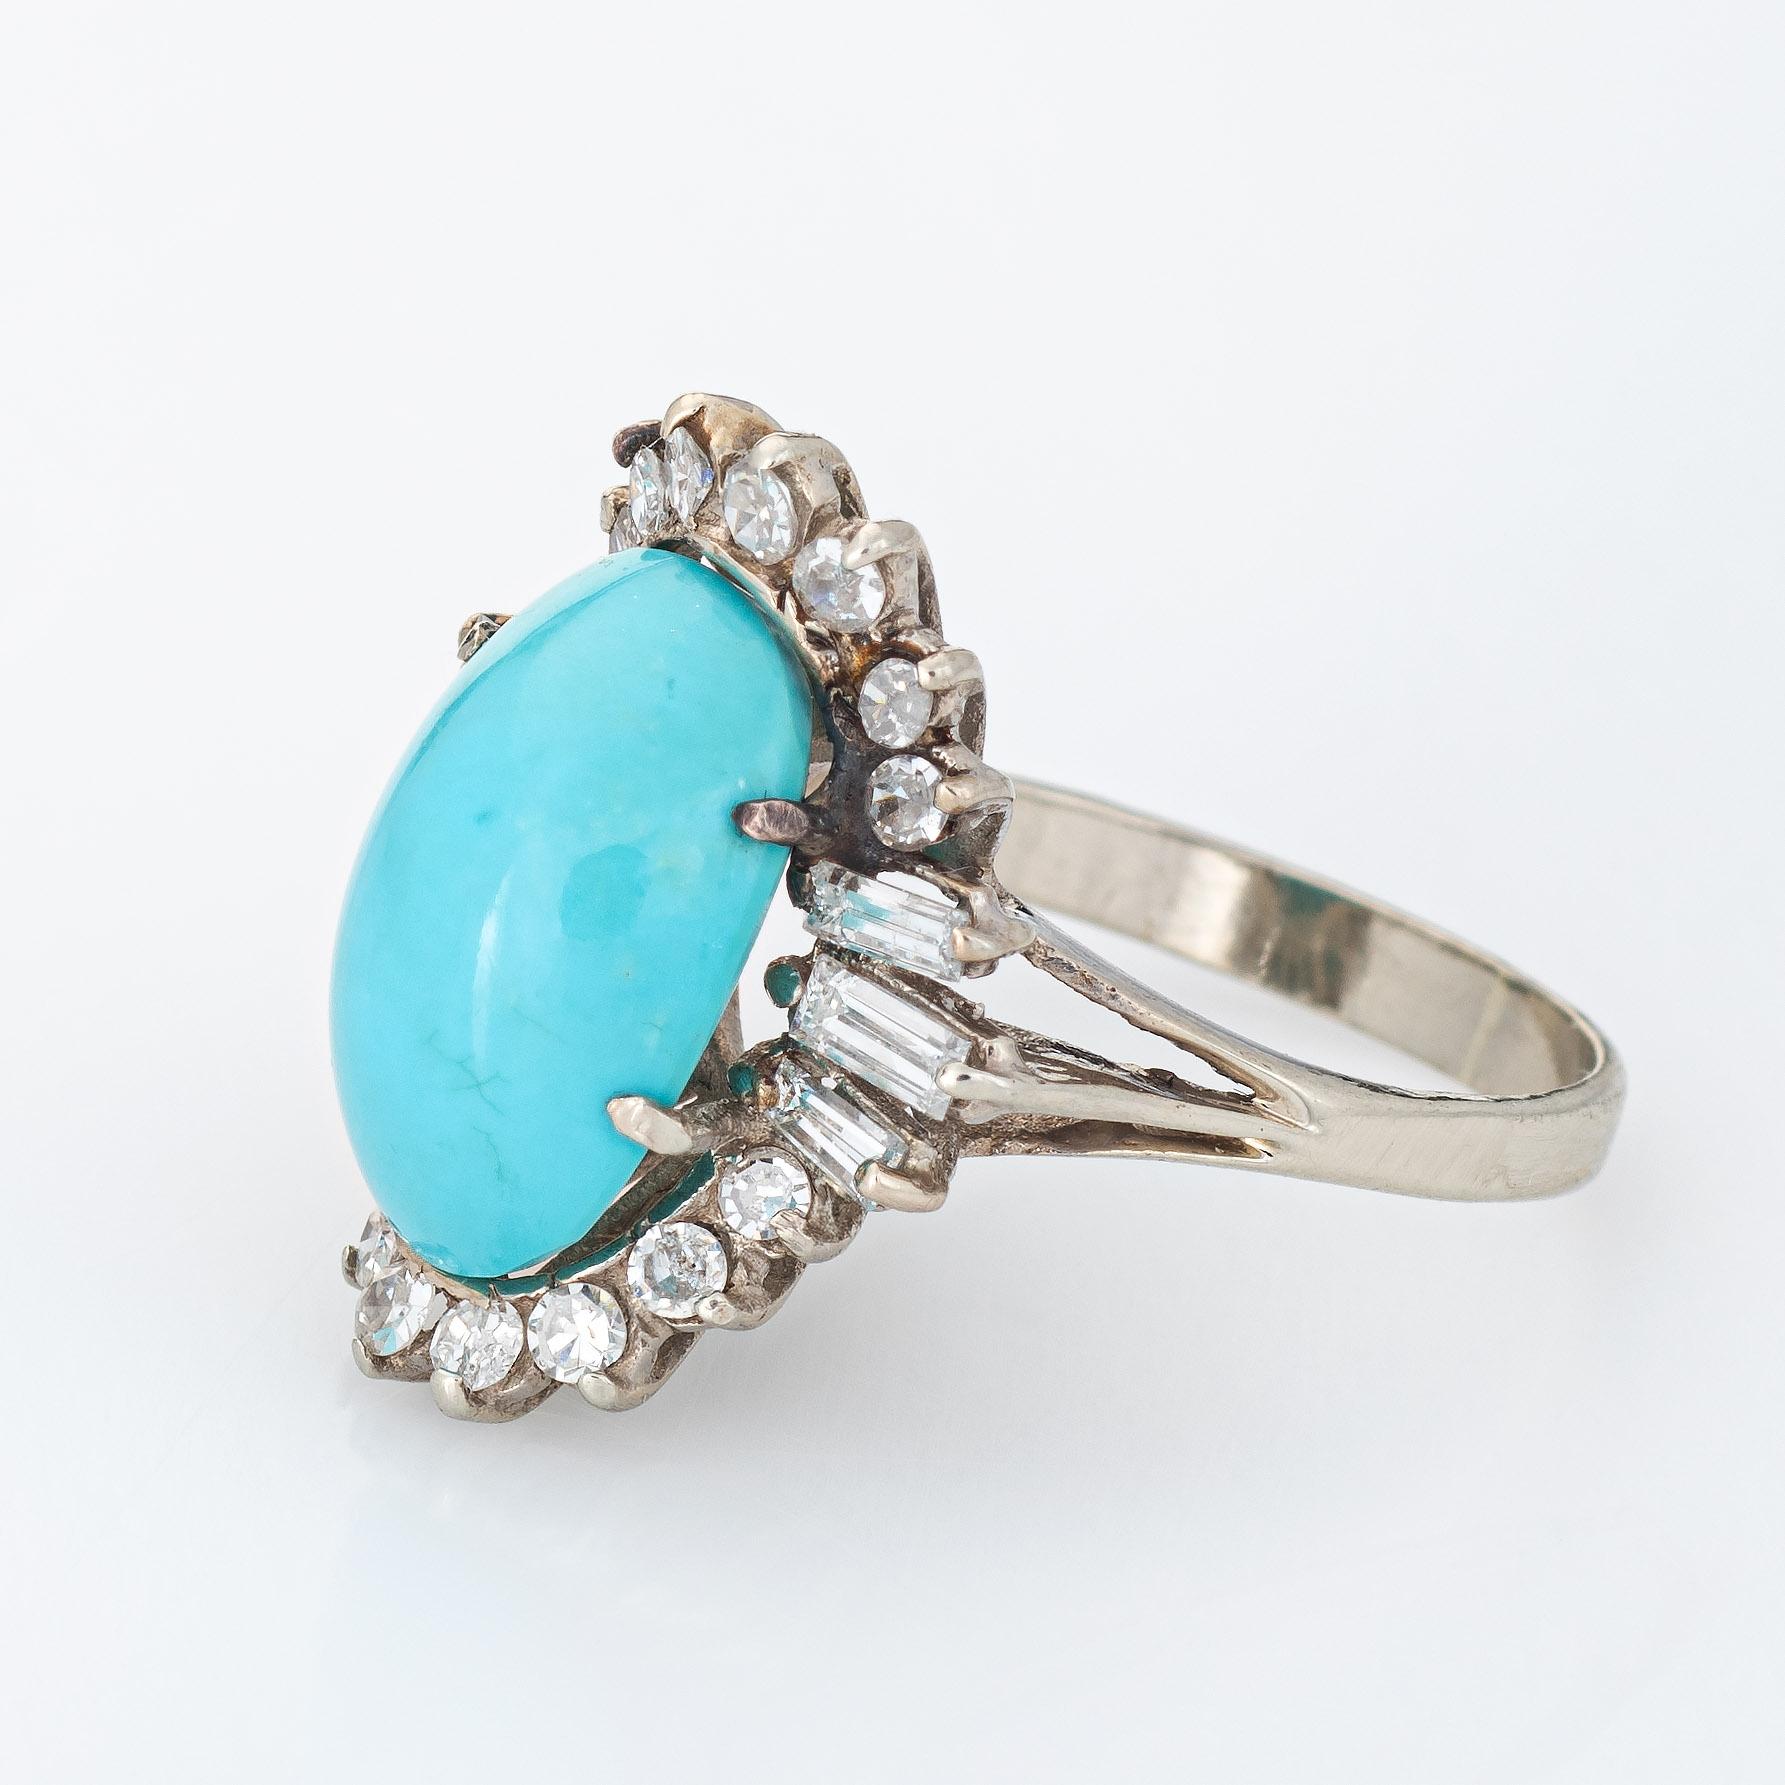 Cabochon Turquoise Diamond Ring Vintage 14k White Gold Cocktail Jewelry Mid Century 5.75